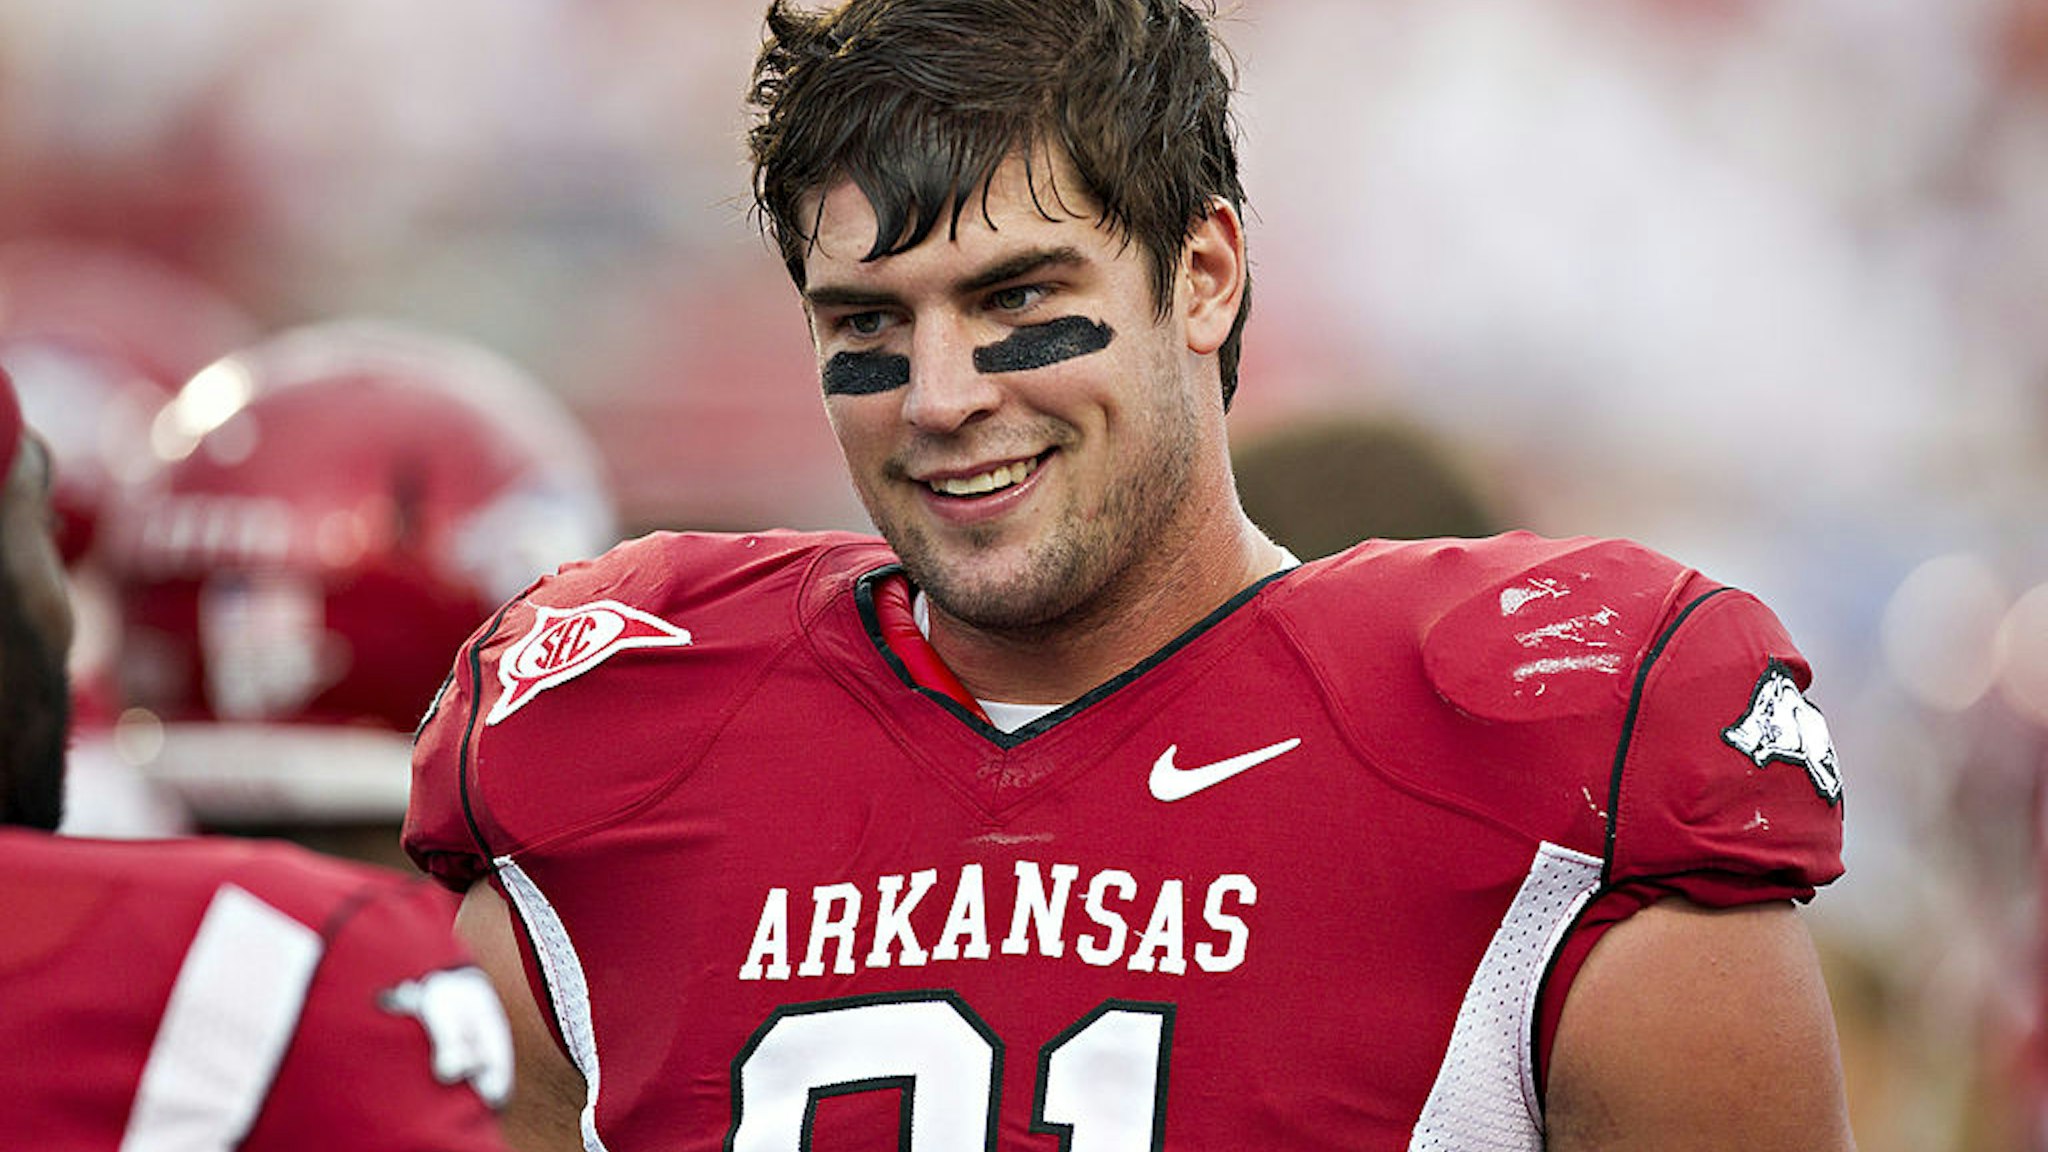 LITTLE ROCK, AR - SEPTEMBER 10: Jake Bequette #91 of the Arkansas Razorbacks warms up before a game against the New Mexico Lobos at War Memorial Stadium on September 10, 2011 in Little Rock, Arkansas. The Razorbacks beat the Lobos 52-3.(Photo by Wesley Hitt/Getty Images)